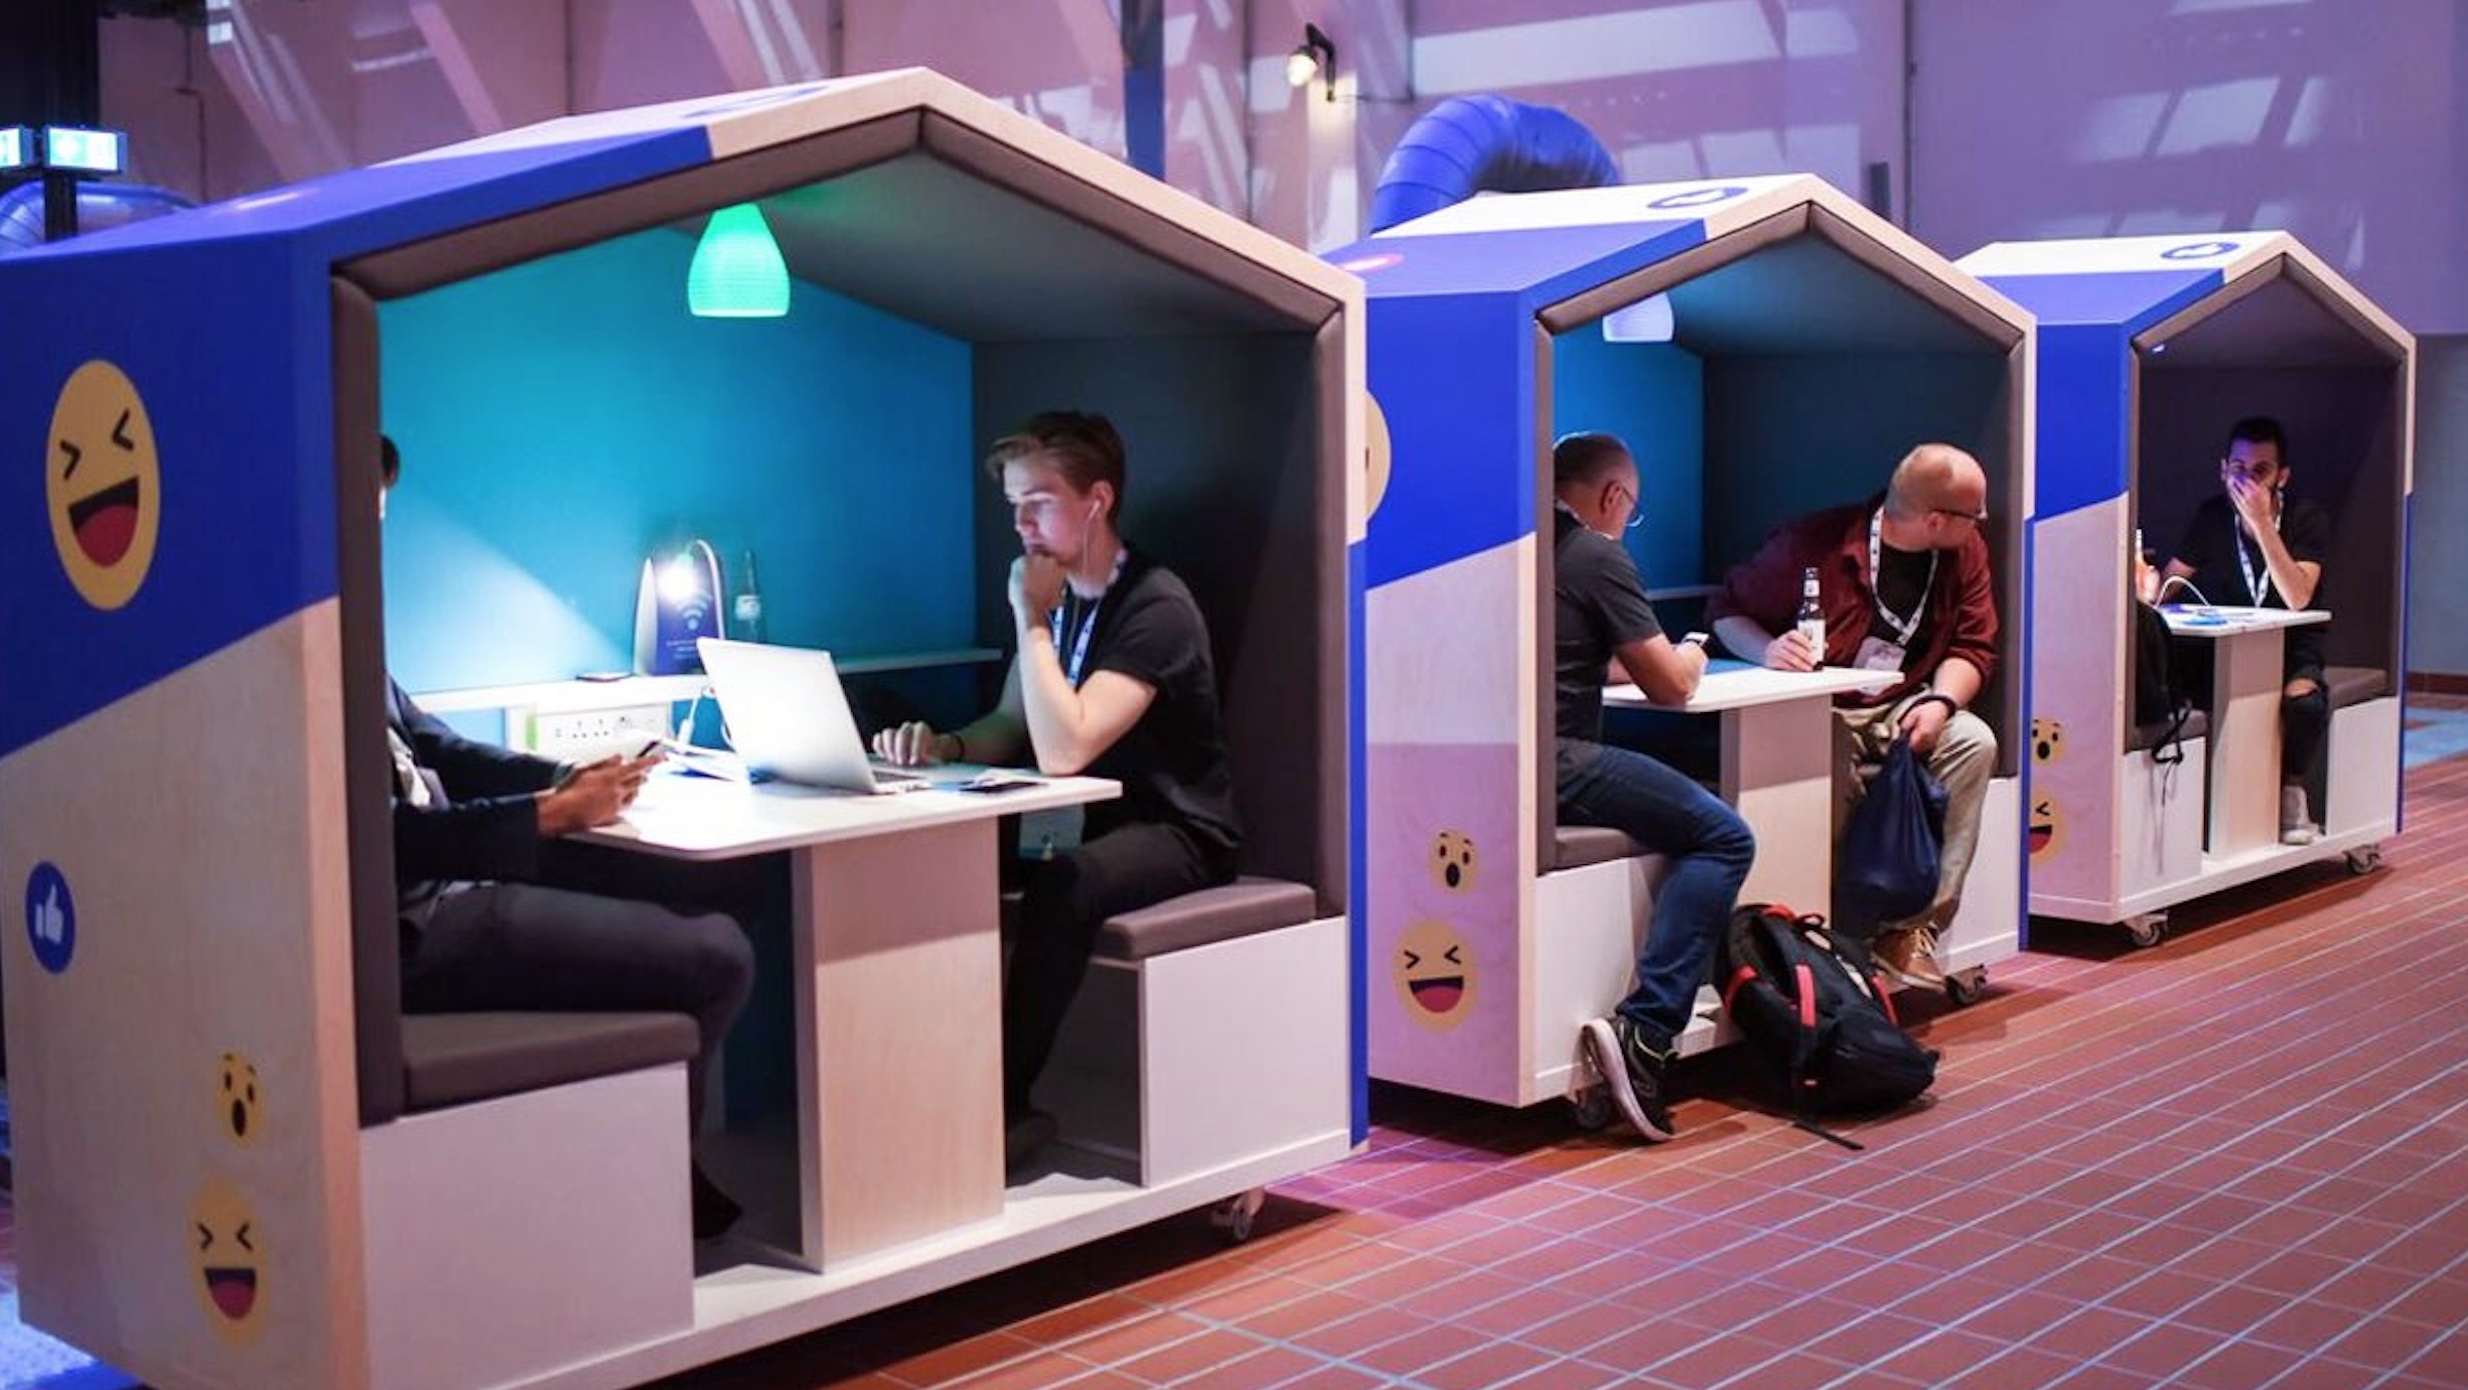 Three Nook Office Pods with Facebook branding (white and blue with smiley faces)